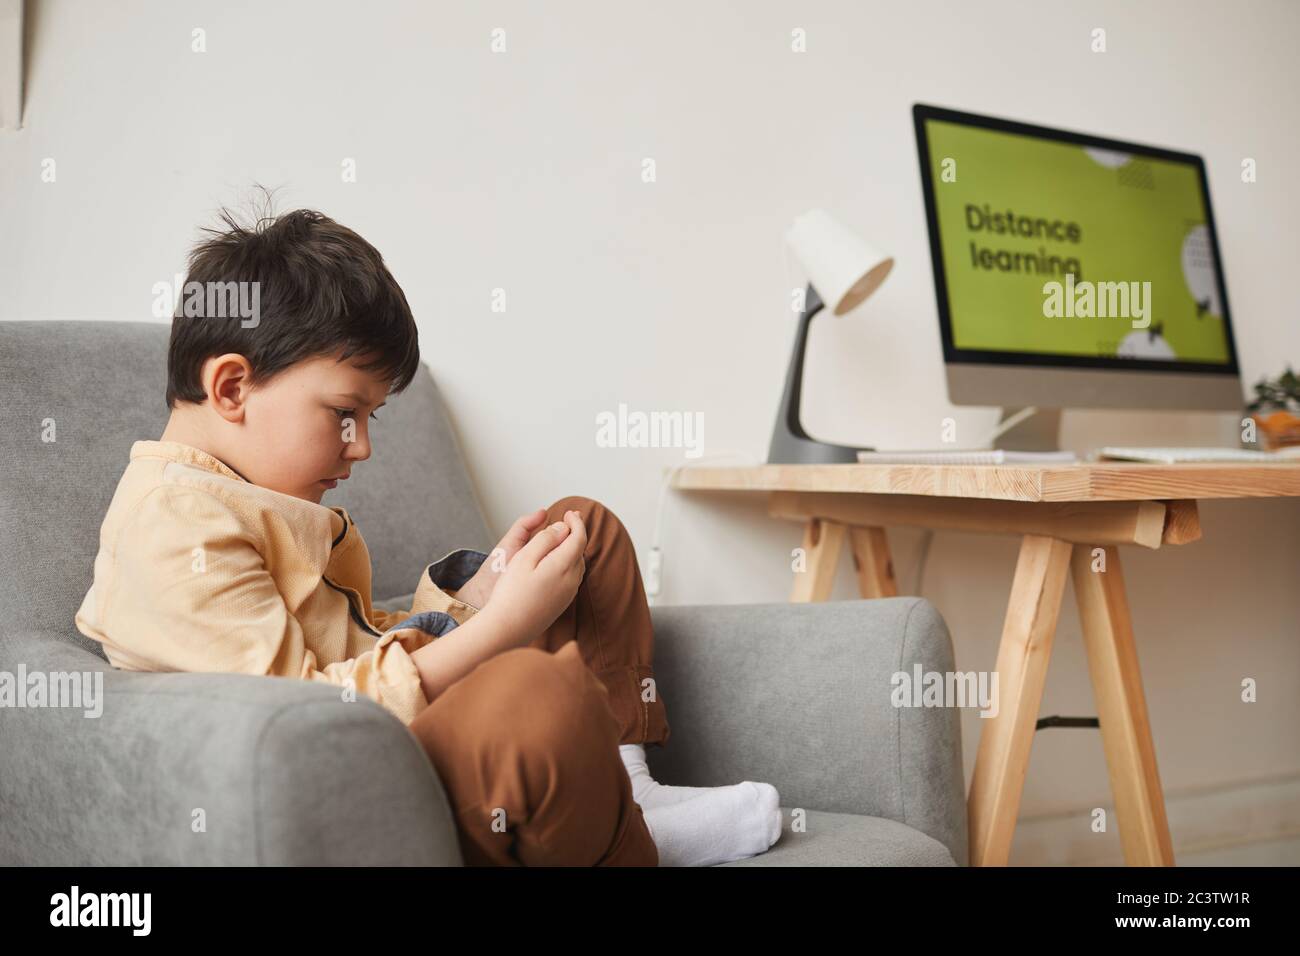 Side view portrait of cute boy sitting in armchair and using digital tablet with online school website in background, copy space Stock Photo